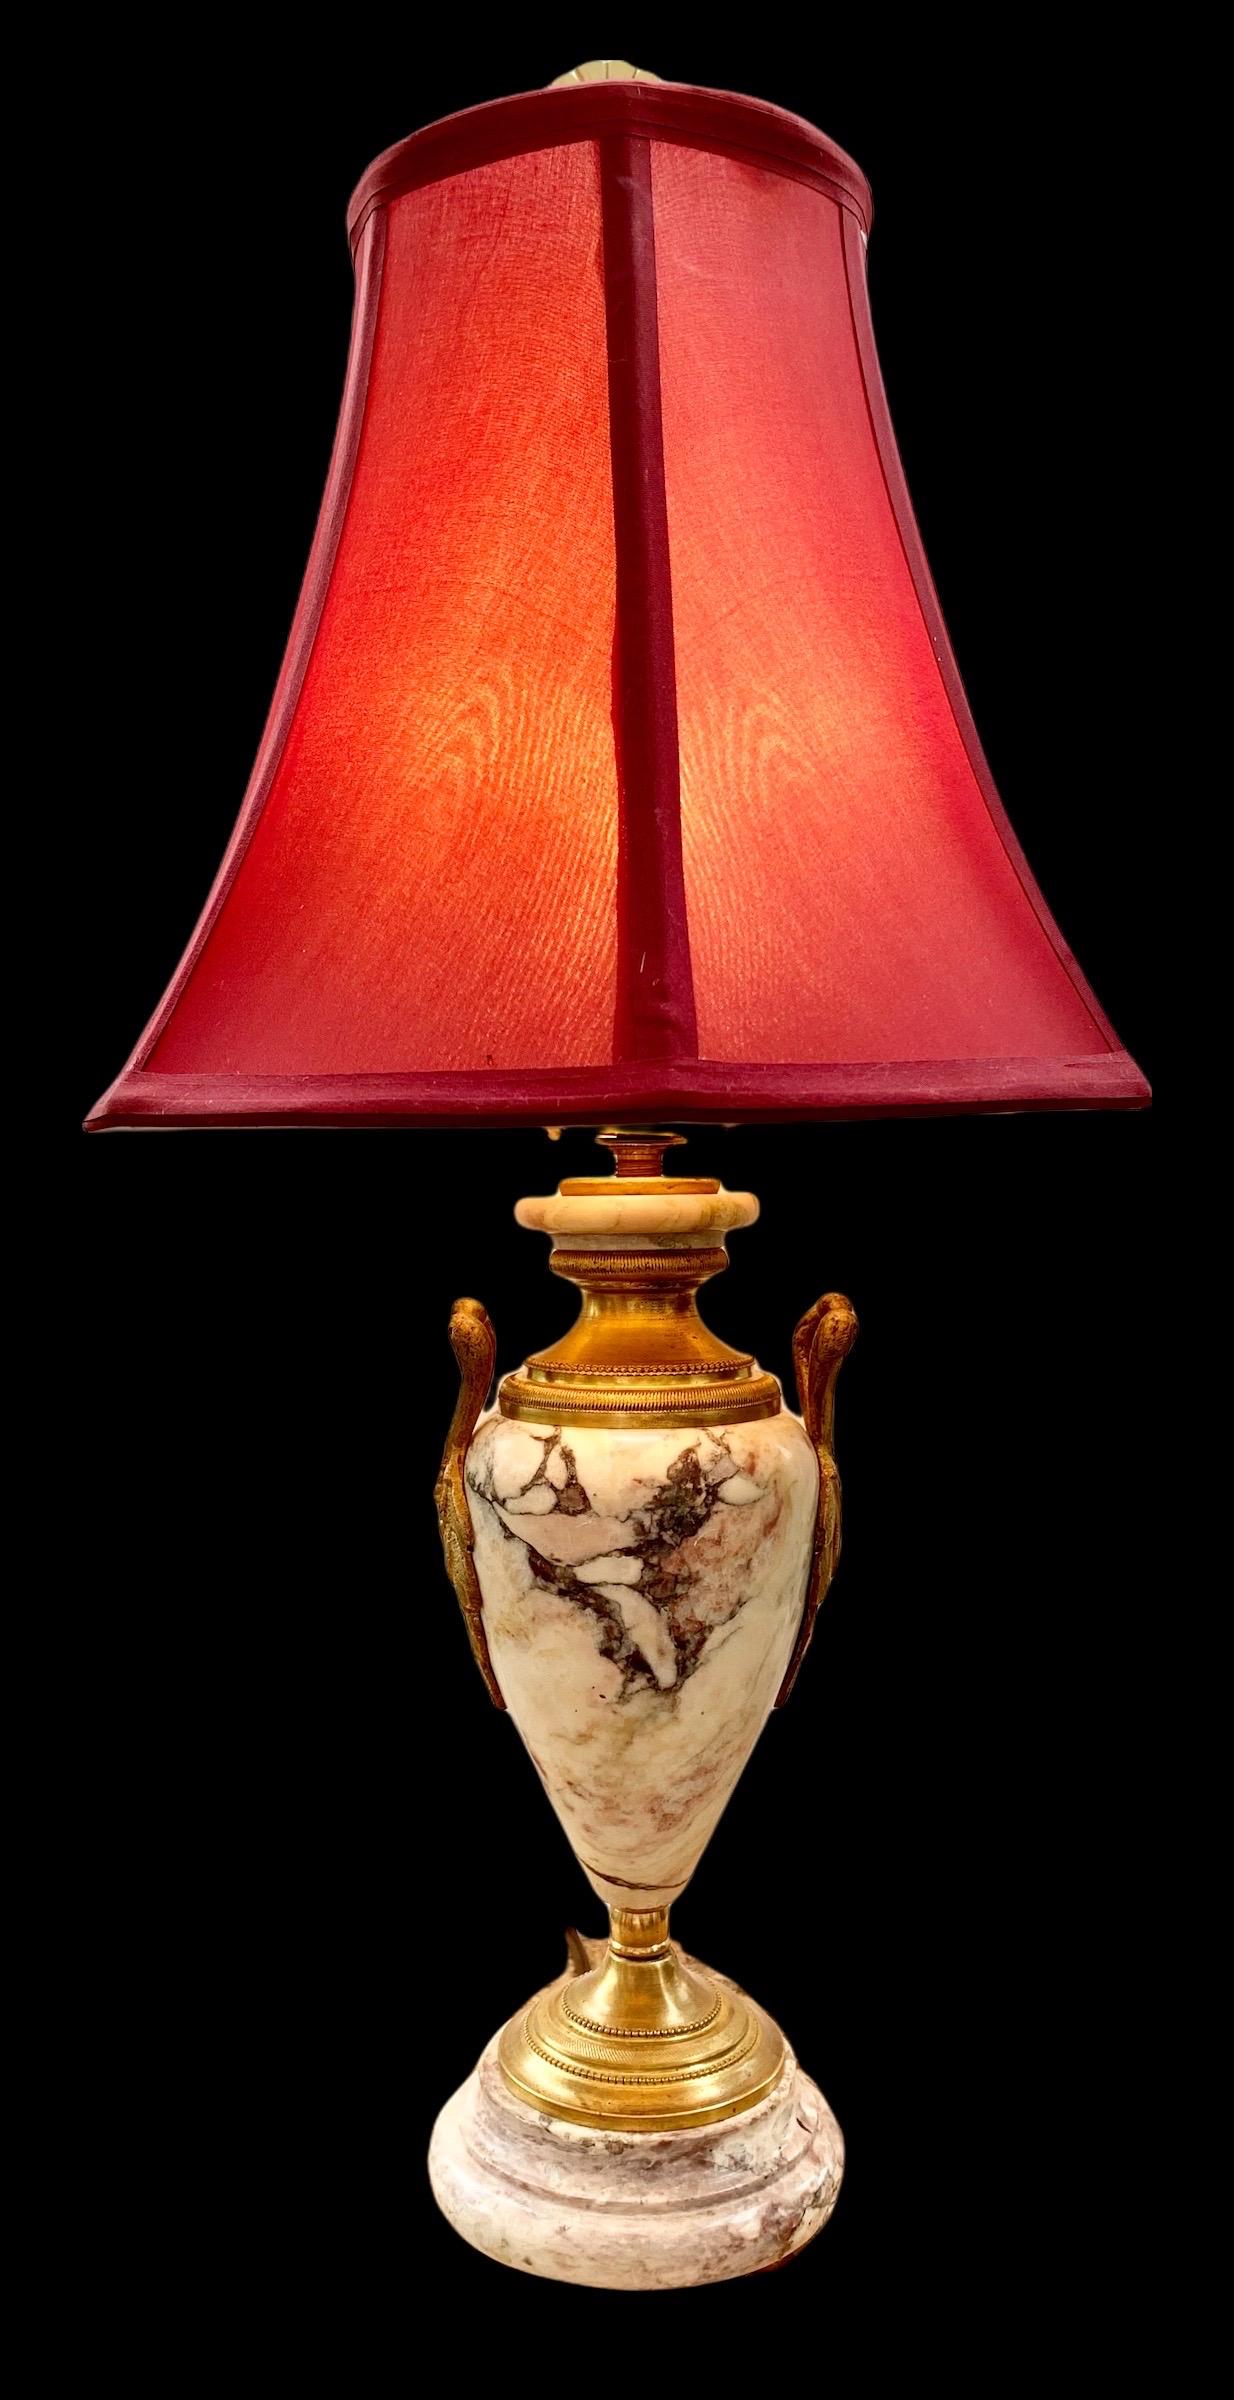 A lovely petite, vintage French figured marble and gilt bronze table lamp with a new red moire shade, having beautiful ormolu mounts, decorative guilded and beaded feet and decorative guilded caps. 
Perfect in a dressing area, on a vanity, in a